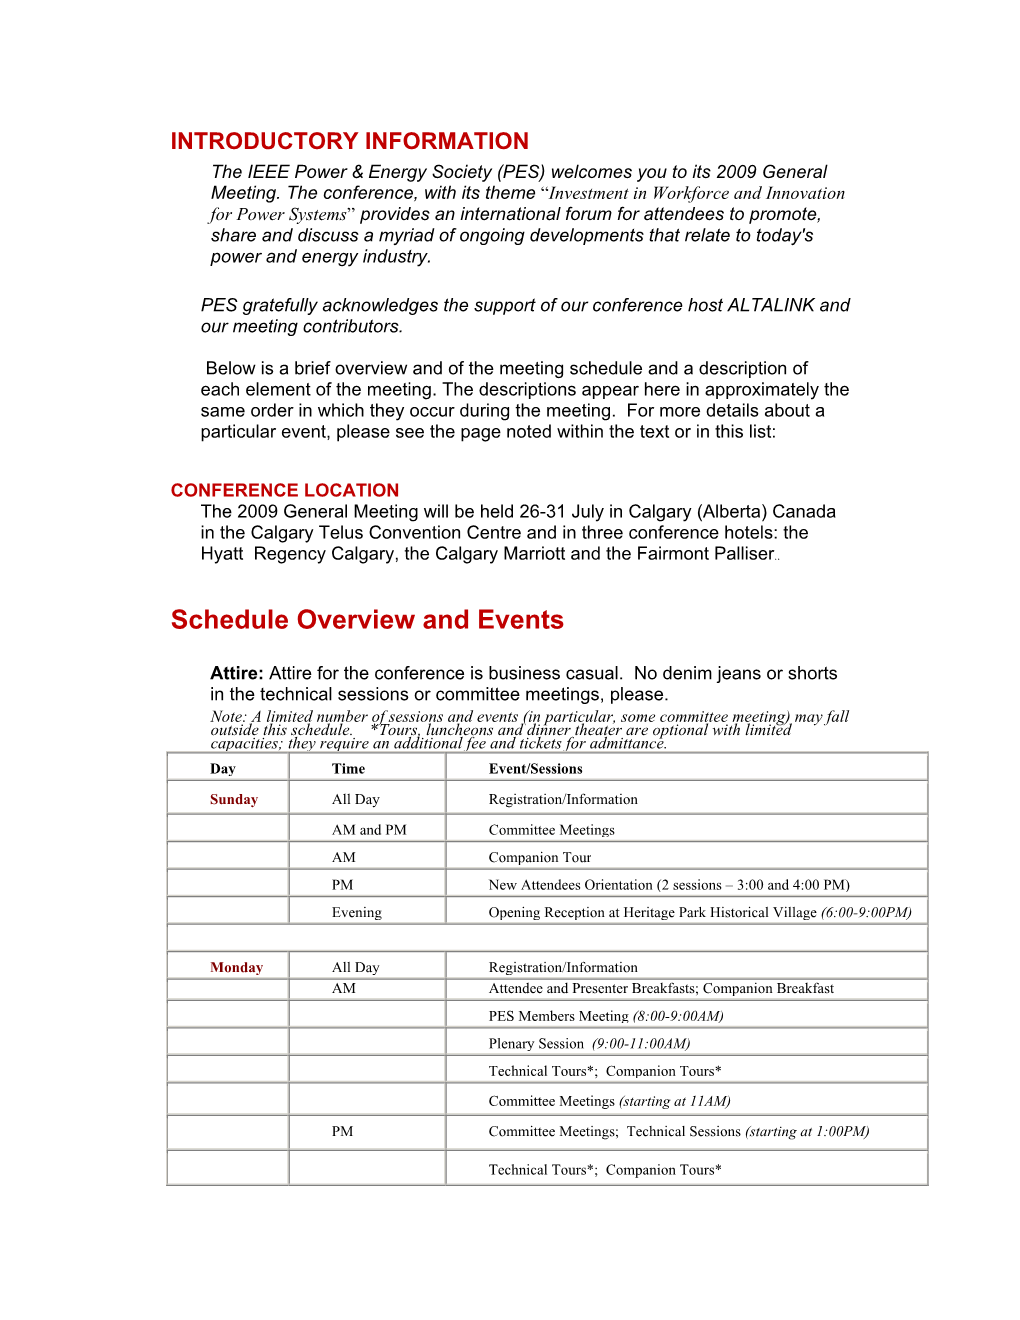 Schedule Overview and Events